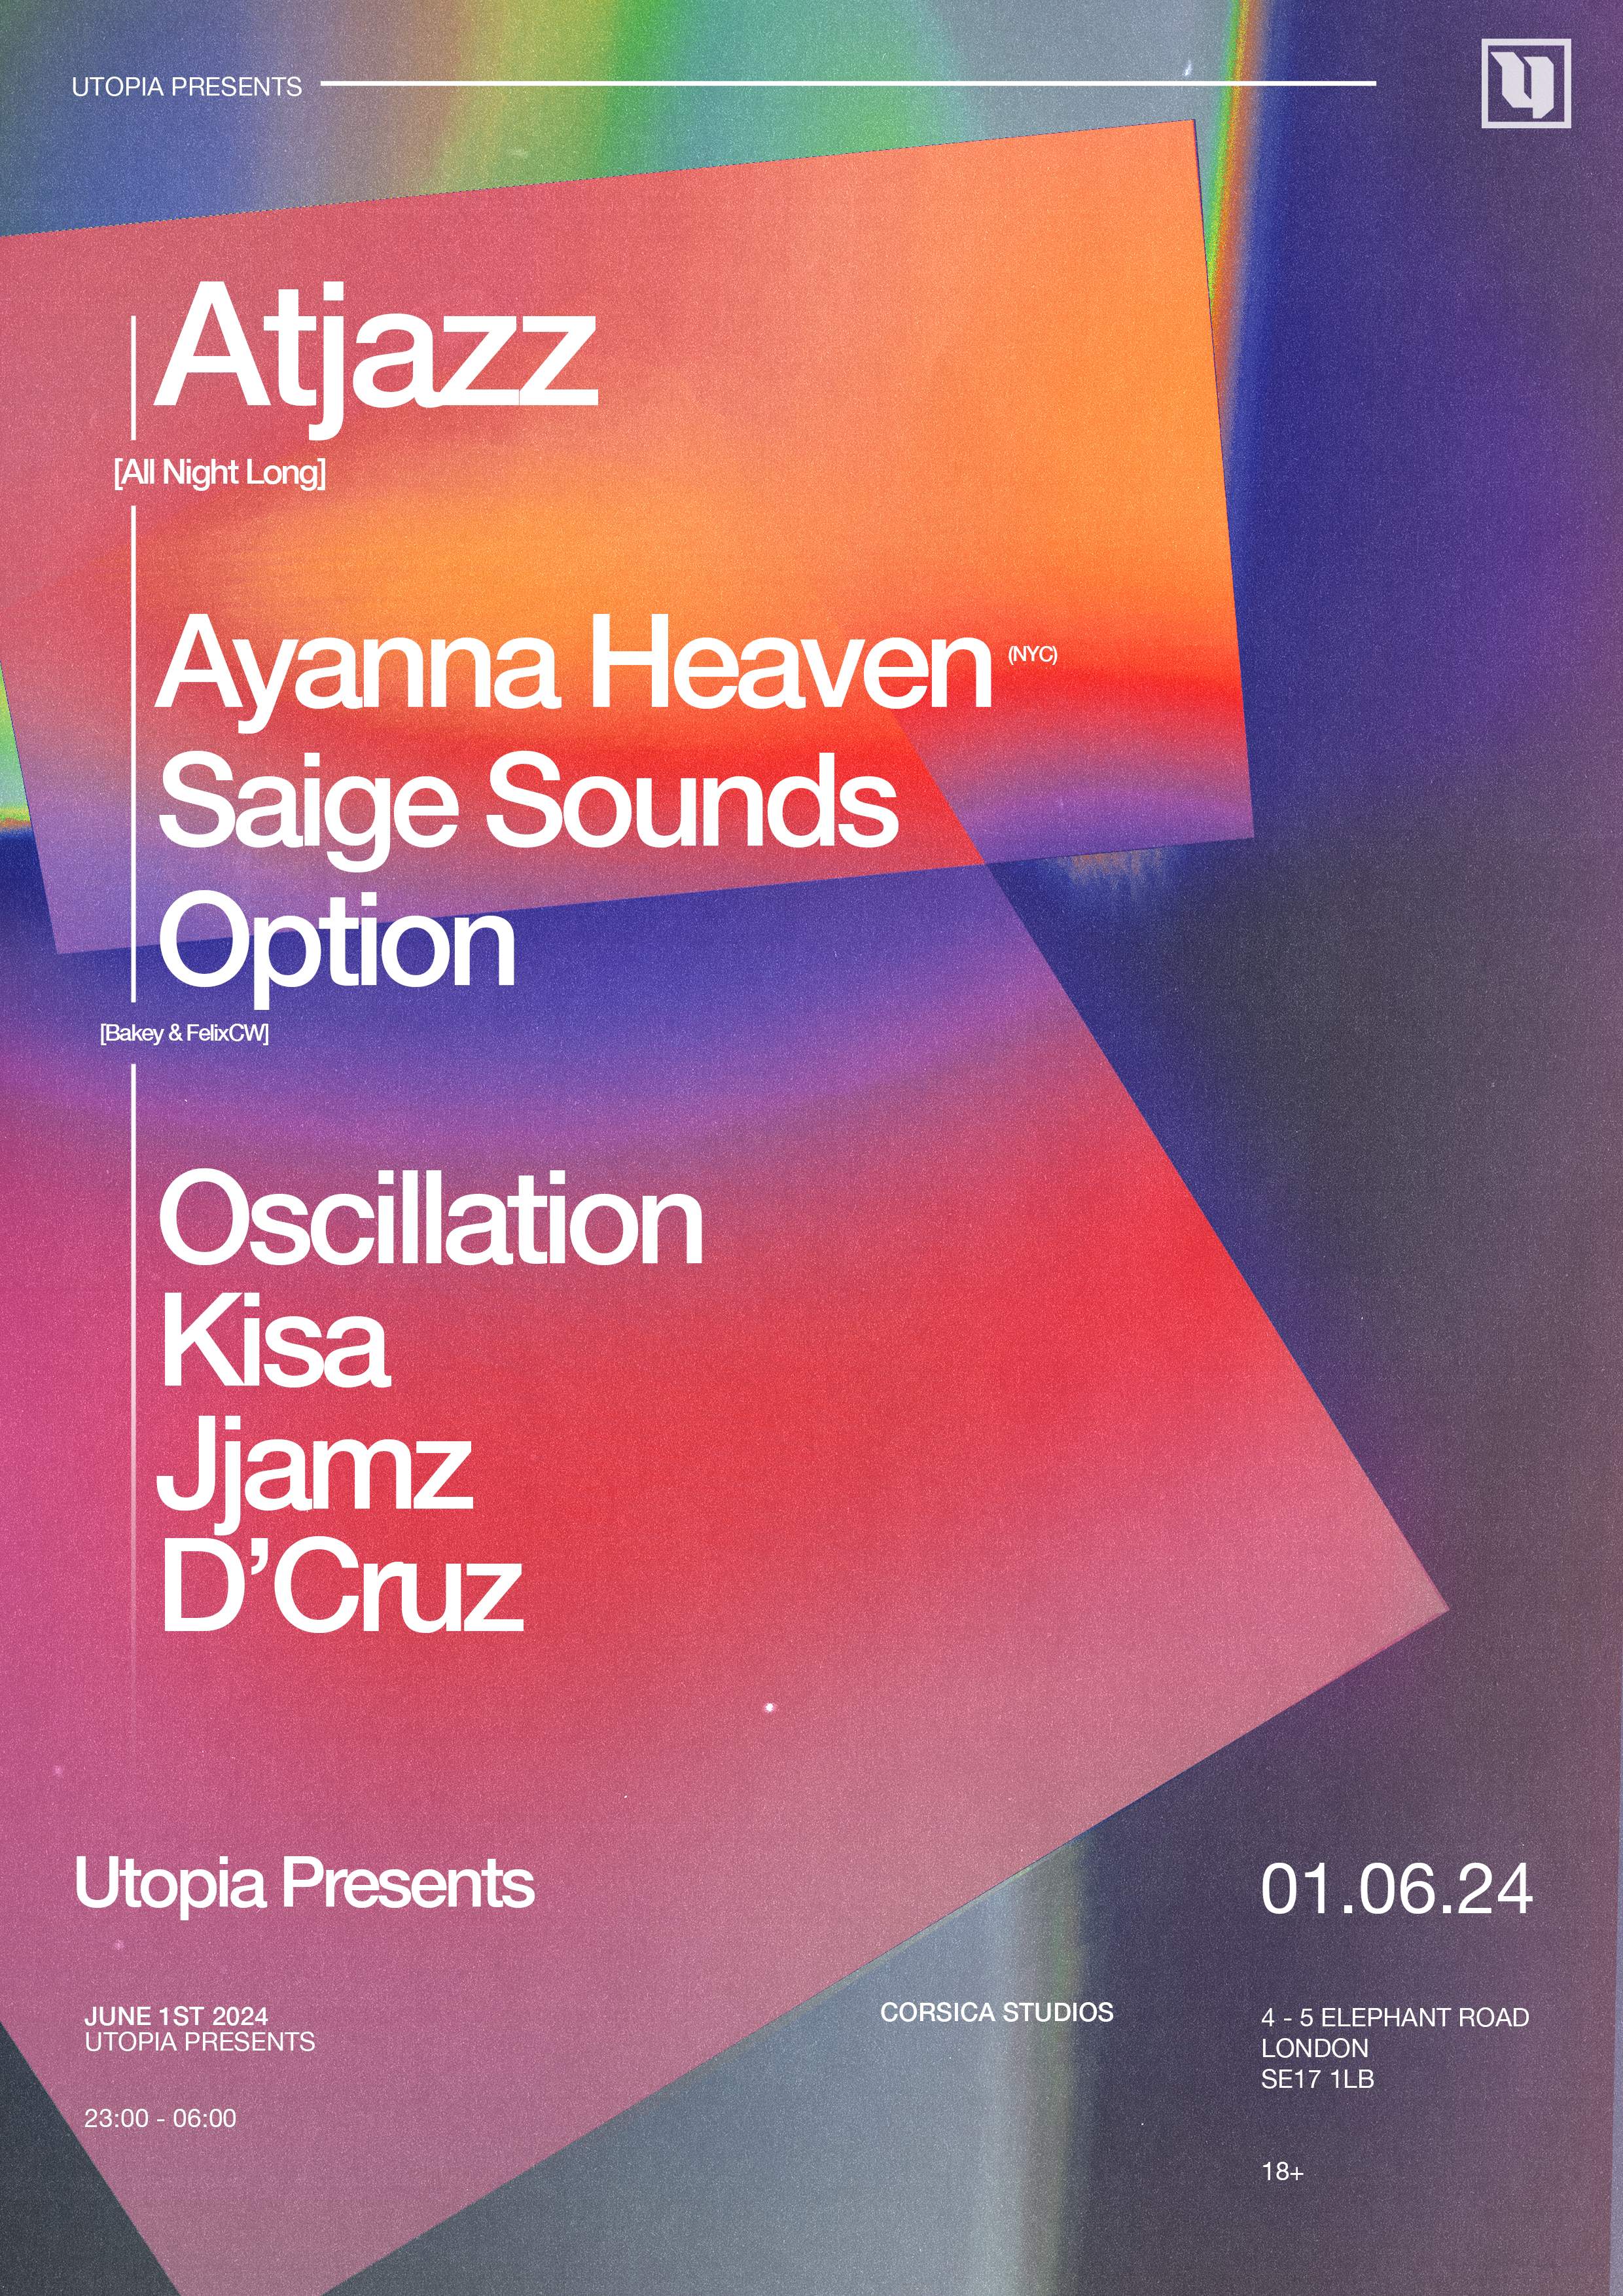 Utopia: Atjazz [All Night Long], Ayanna Heaven (NYC), Saige Sounds, Option + more - Página frontal